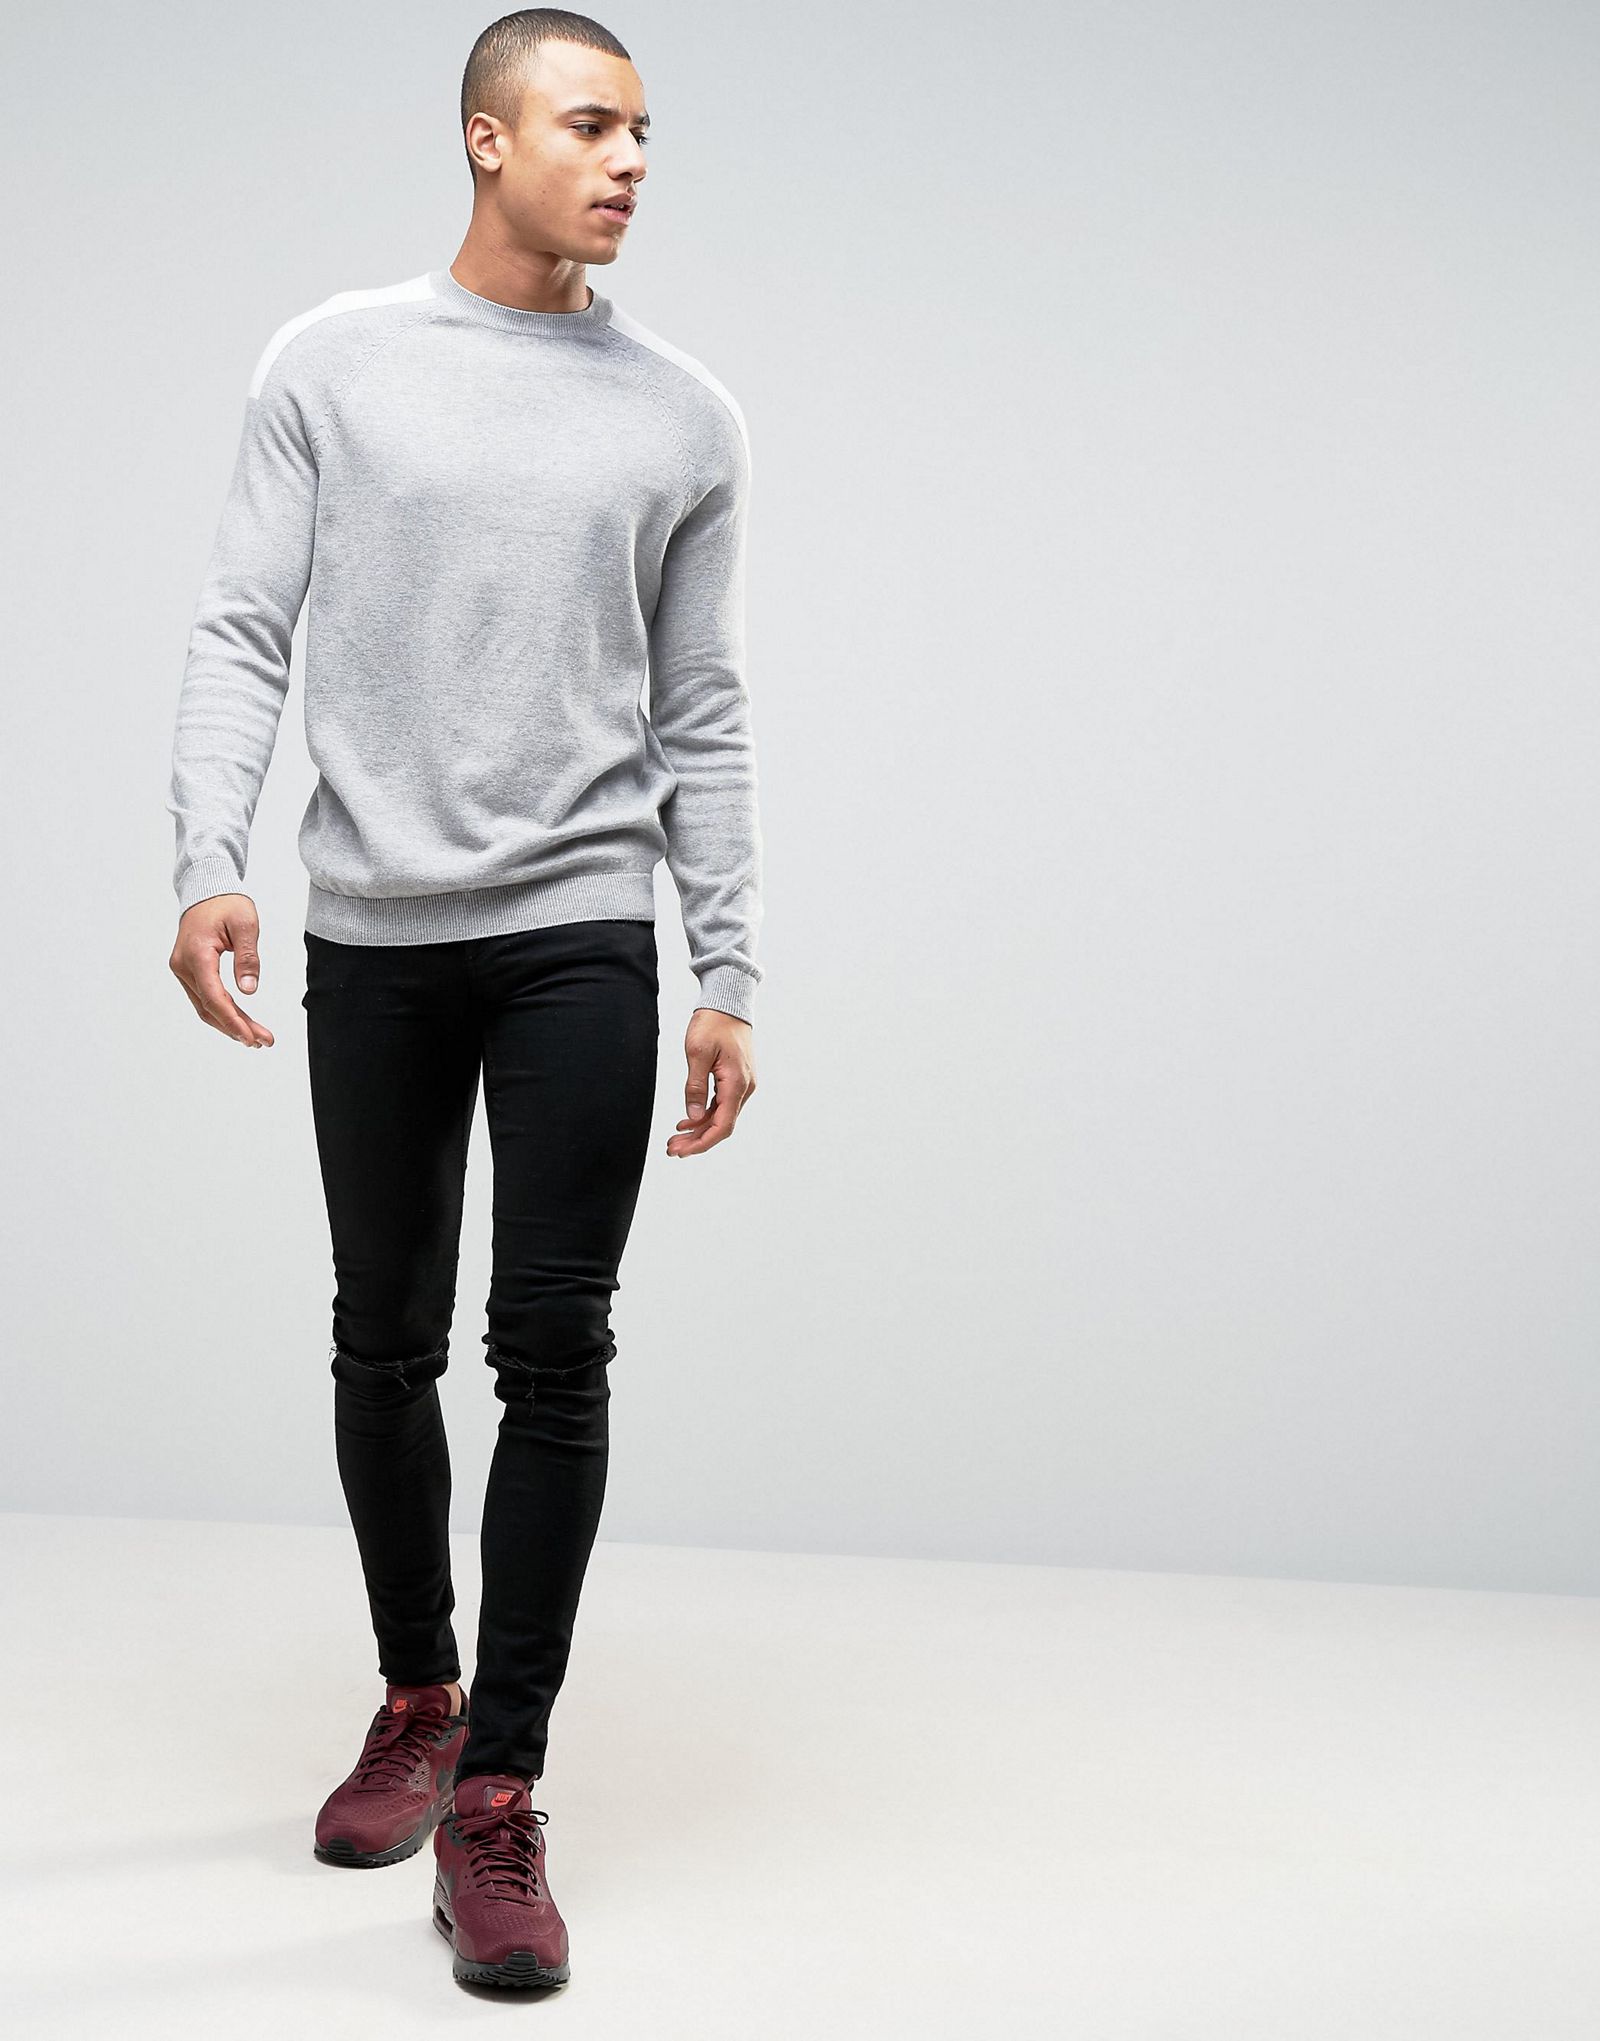 New Look Jumper With Contrast Shoulder Panel In Grey